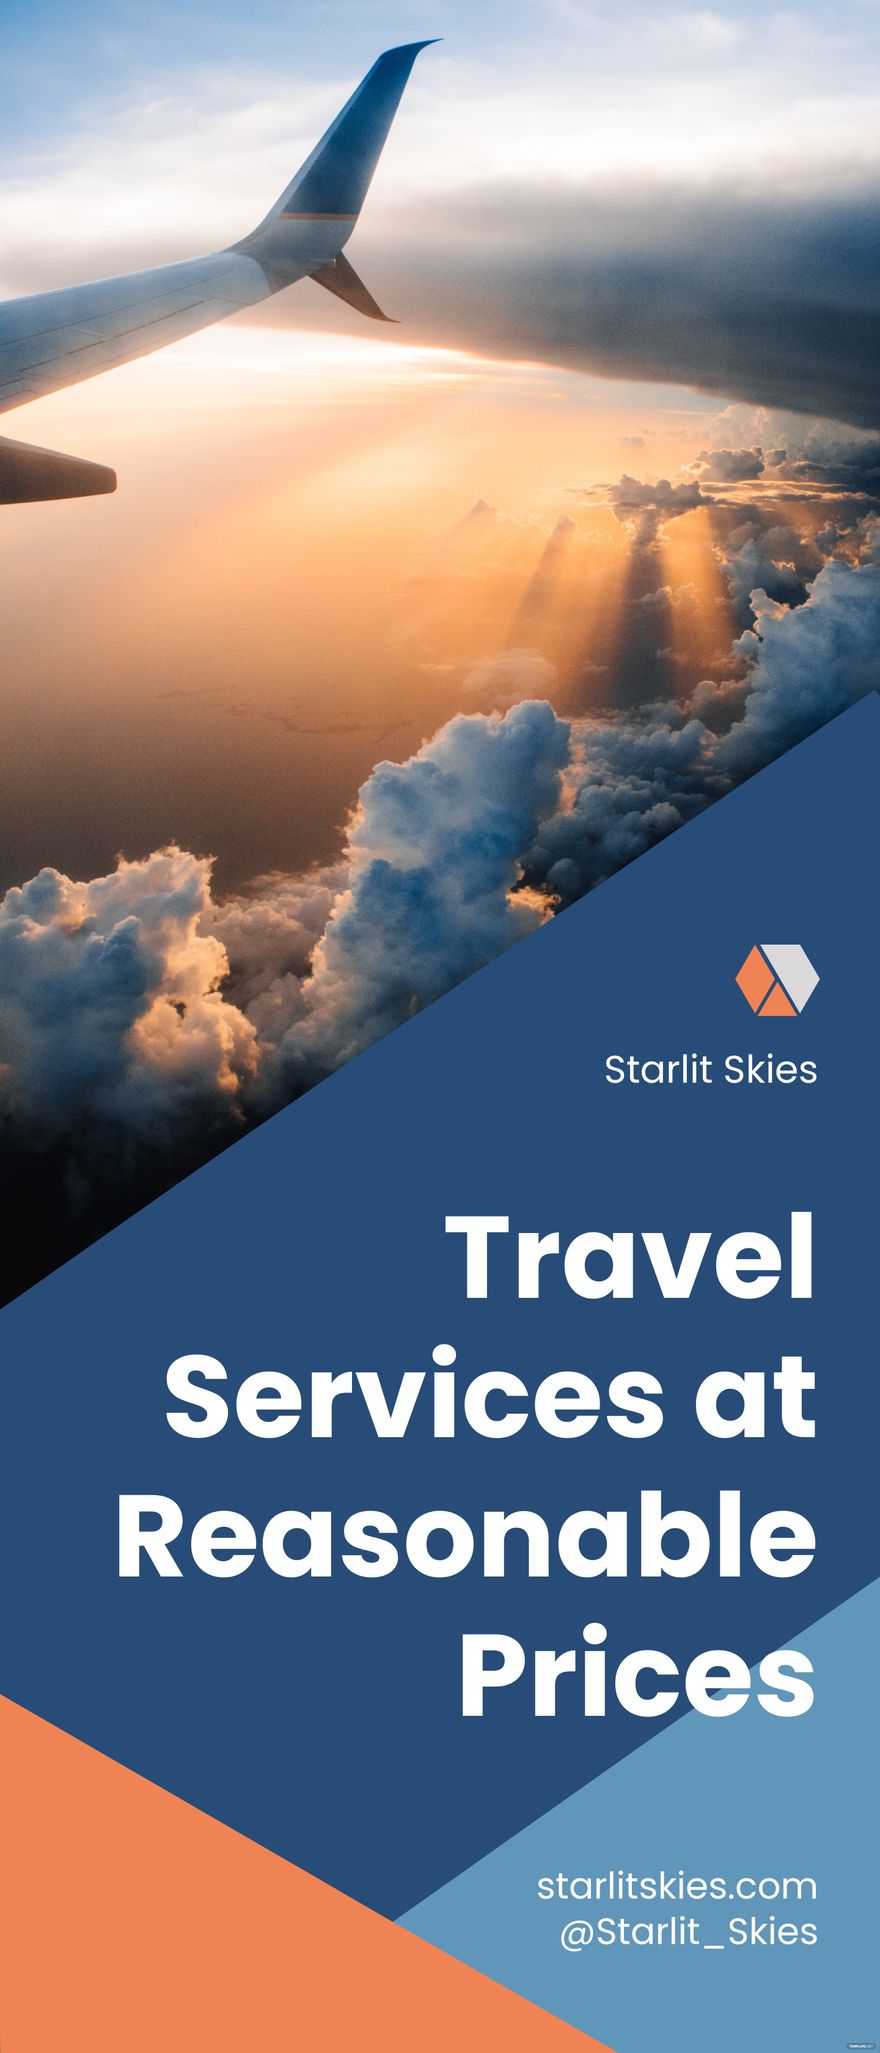 Free Travel Services Roll Up Banner Template in Word, Google Docs, Publisher